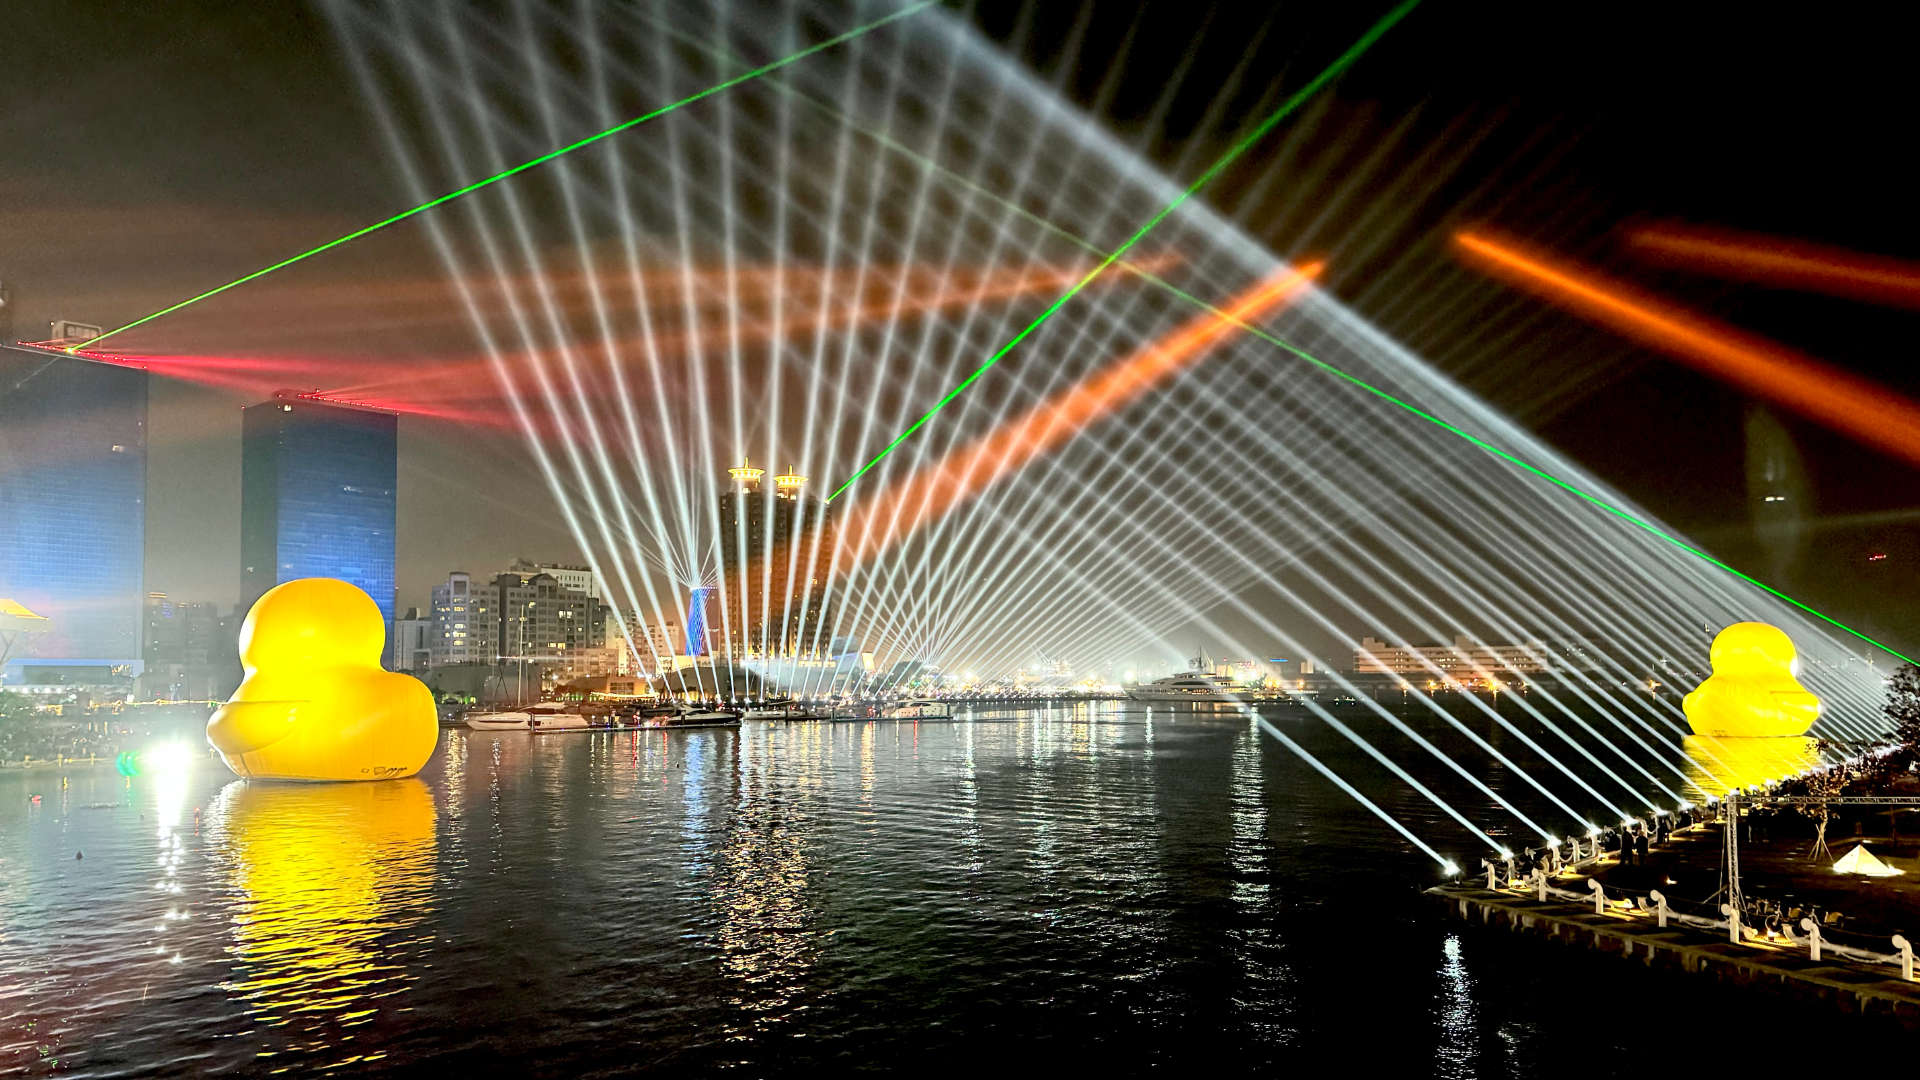 Night view of two large rubber ducks floating on Kaohsiung Harbor with a laser light show projecting dozens of multicolor beams of light into the dark sky.